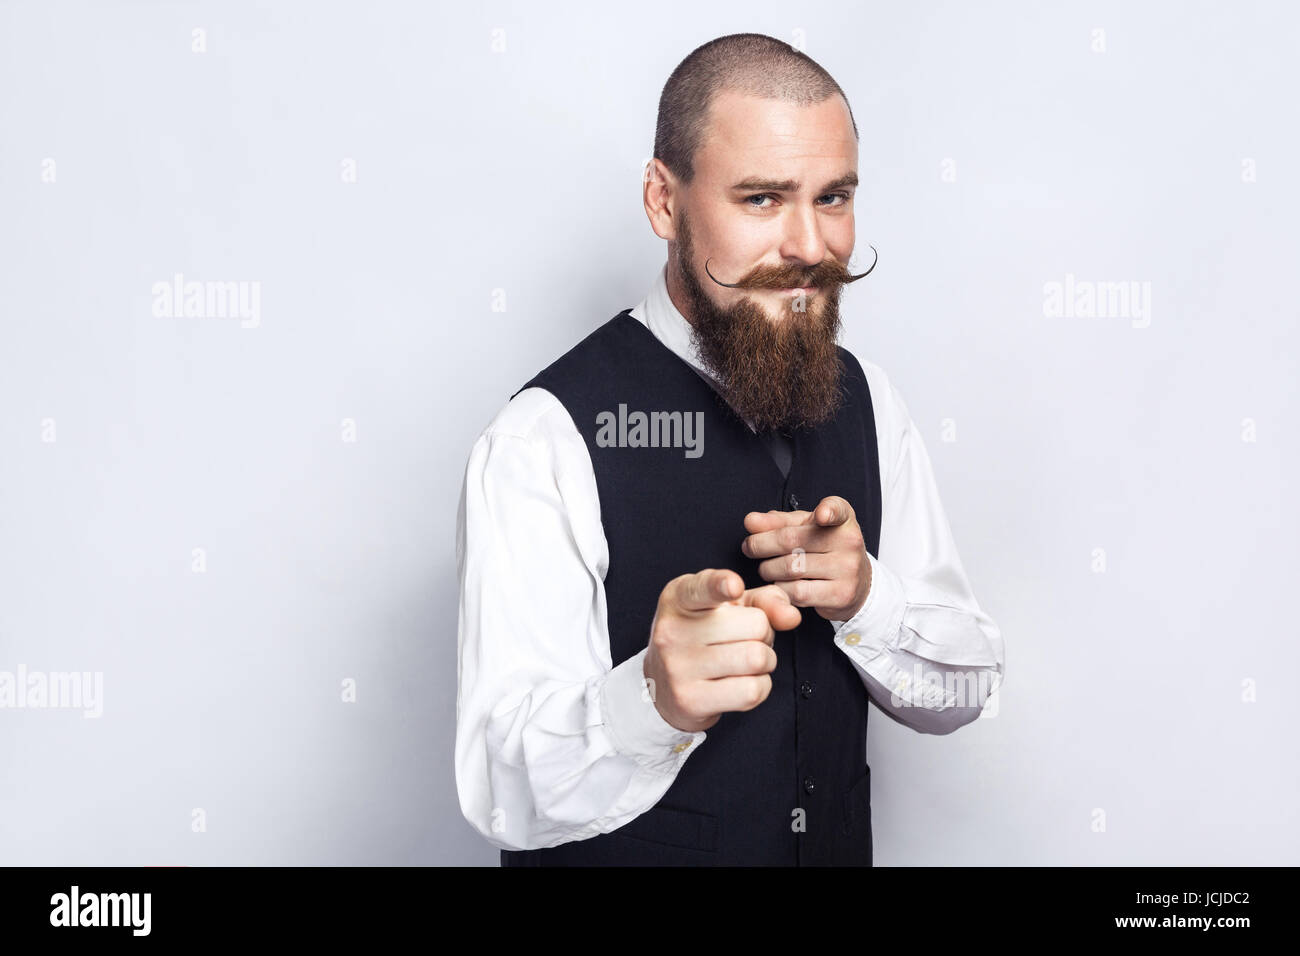 Hey you. Handsome businessman with beard and handlebar mustache looking at camera. studio shot, on gray background. Stock Photo